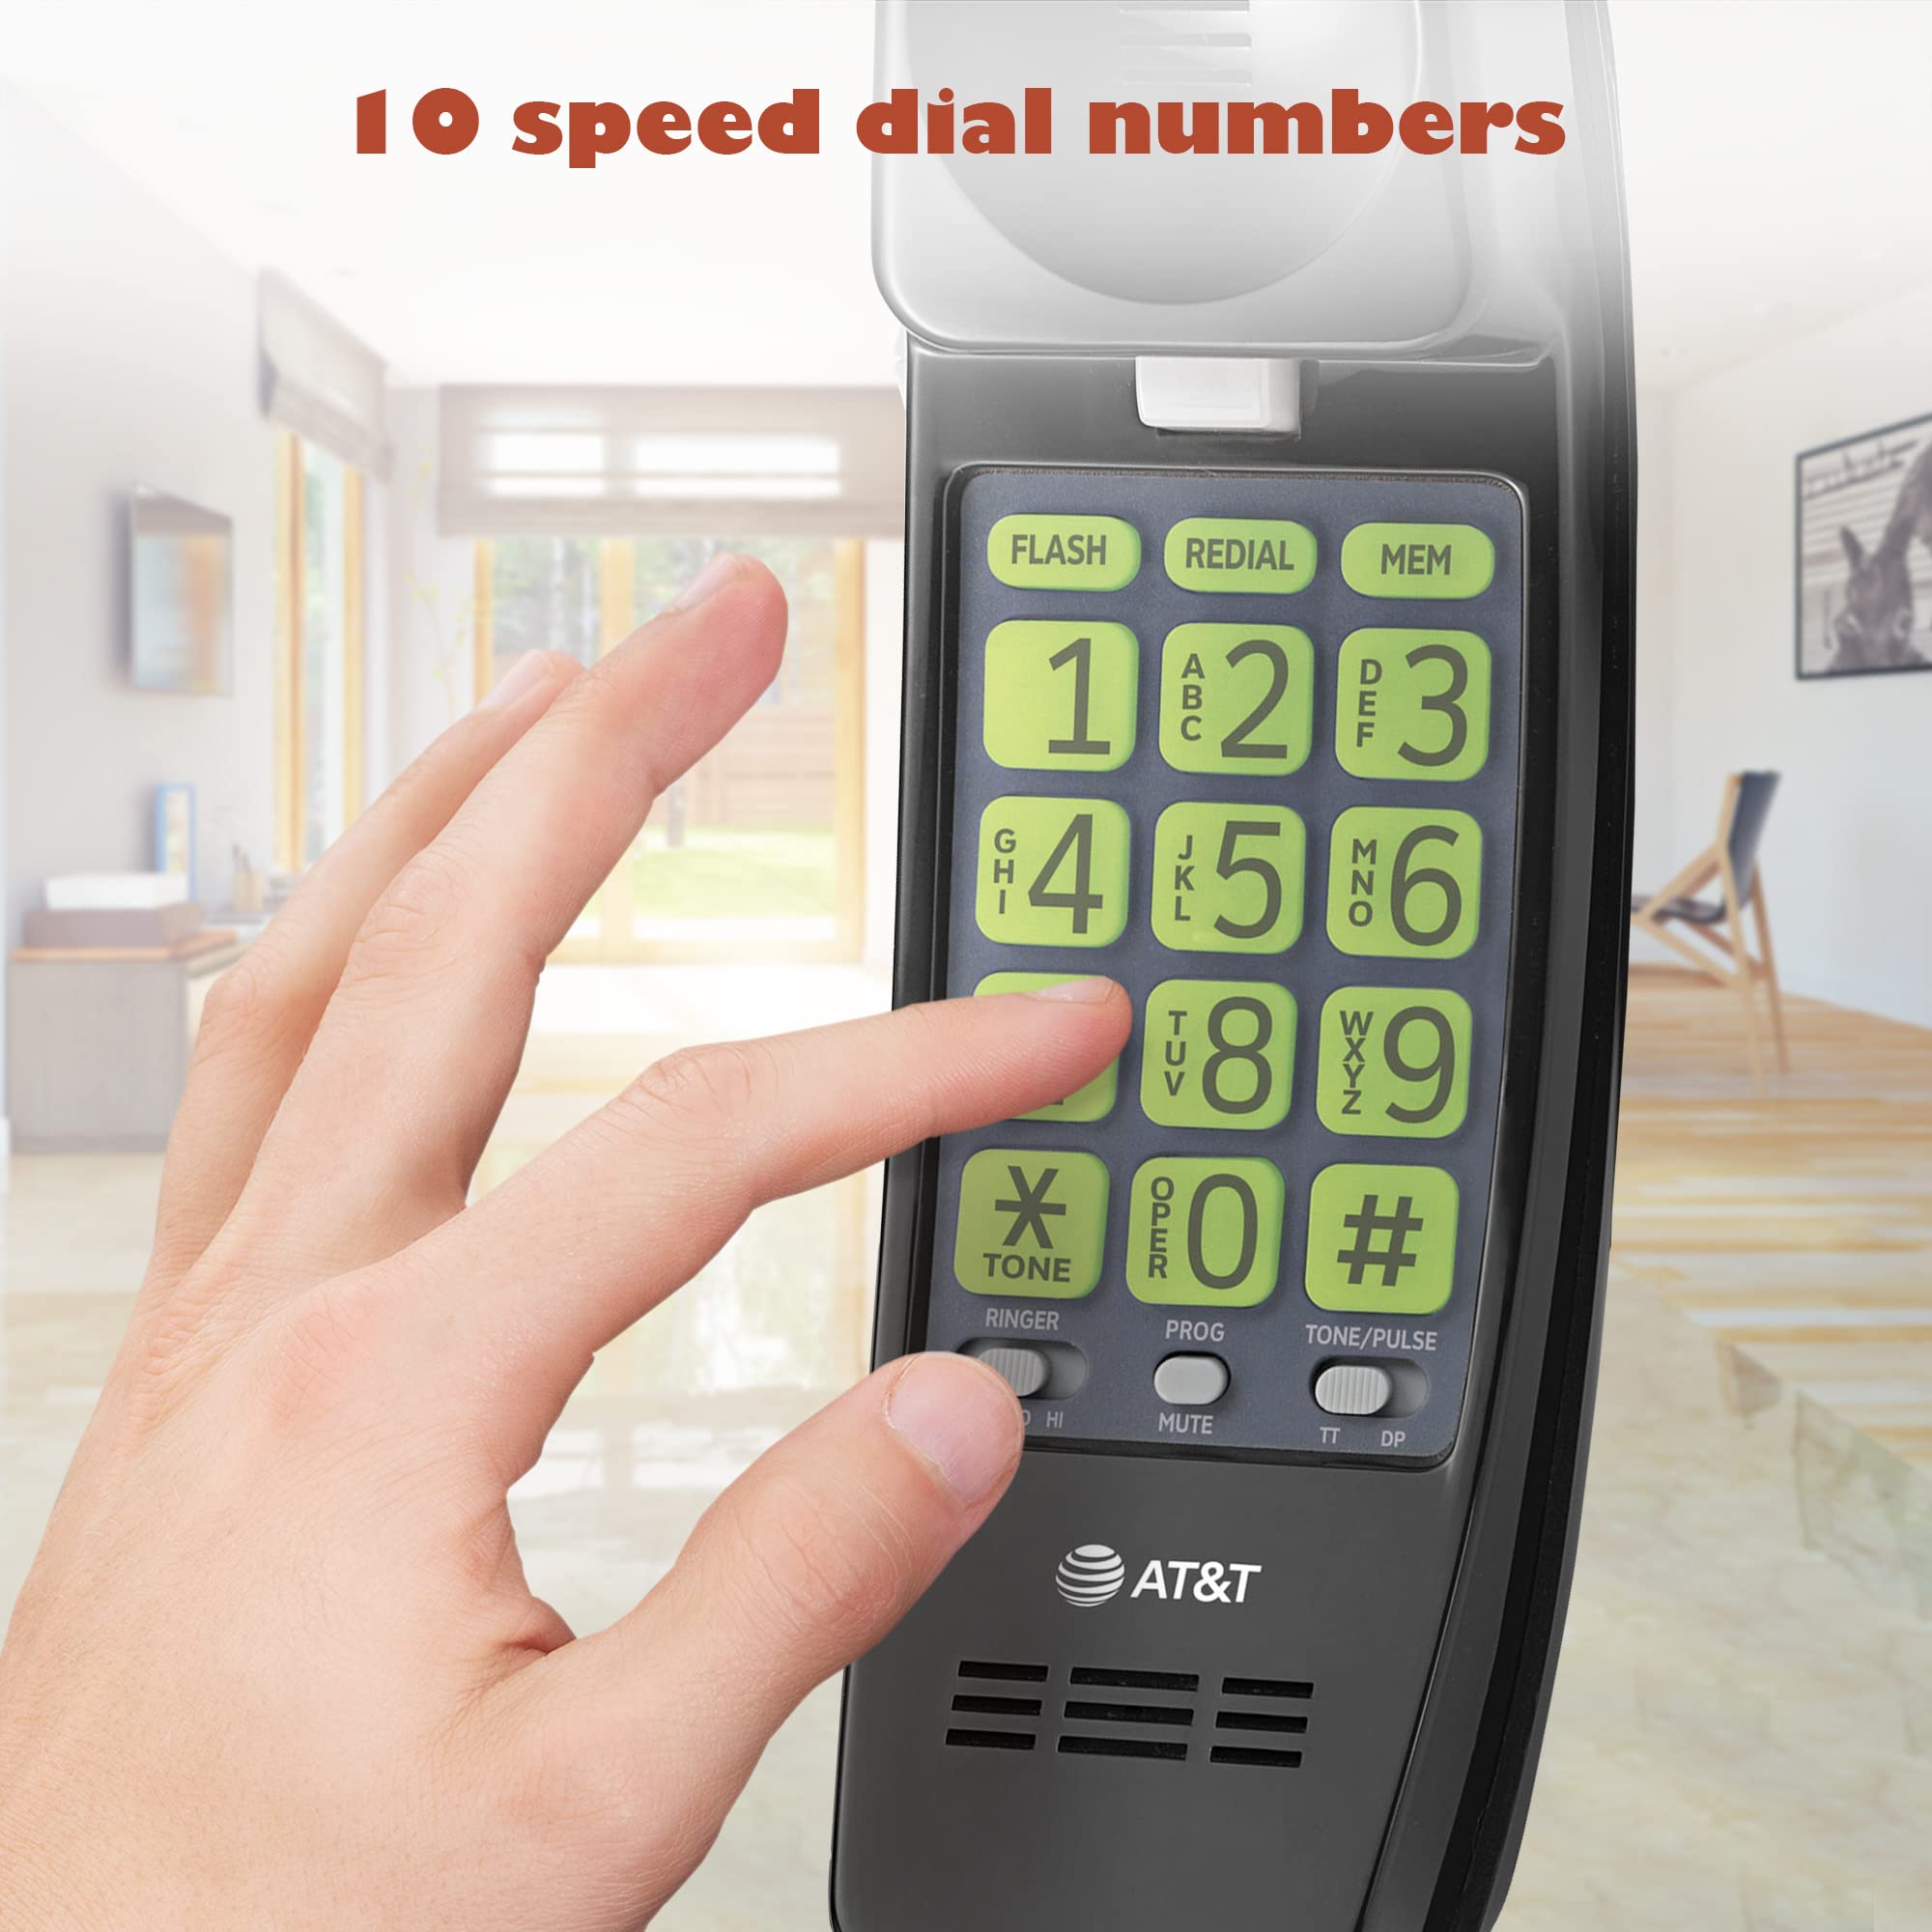 AT&T TRIMLINE 213-11 Corded Home Phone with Extra Big Buttons & Visual Ringer. No AC Power Required, Improved Easy-wall-mount, Lighted Keypad, 10 Speed Dial Keys, Volume Control,Senior Friendly. BLACK